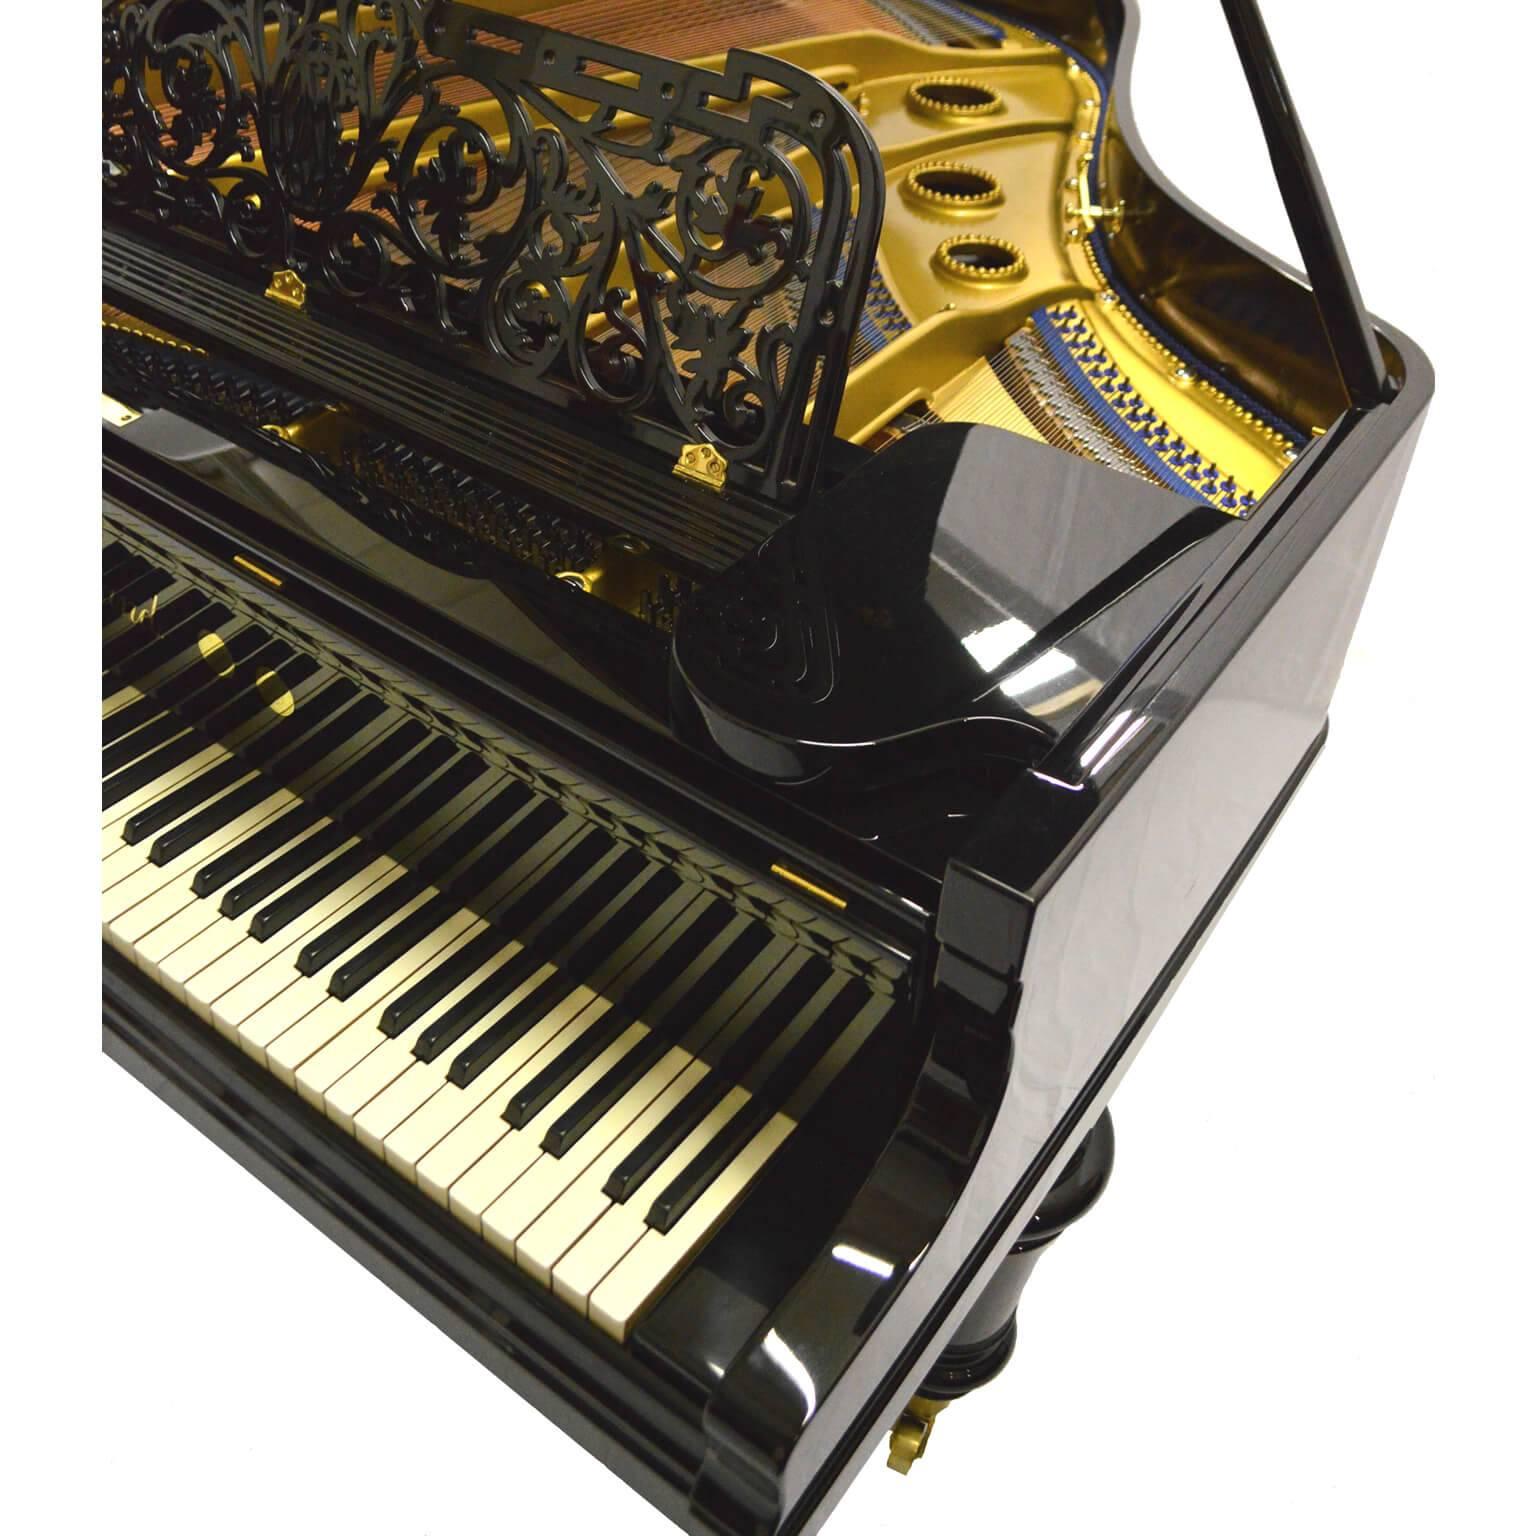 Carl Mand are renowned for producing some of the finest pianos ever made. The Germany company that was based in the city of Coblenz where the Rhine and Moselle rivers meet, a region famous for producing fine wine.
This piano is like a fine wine, it